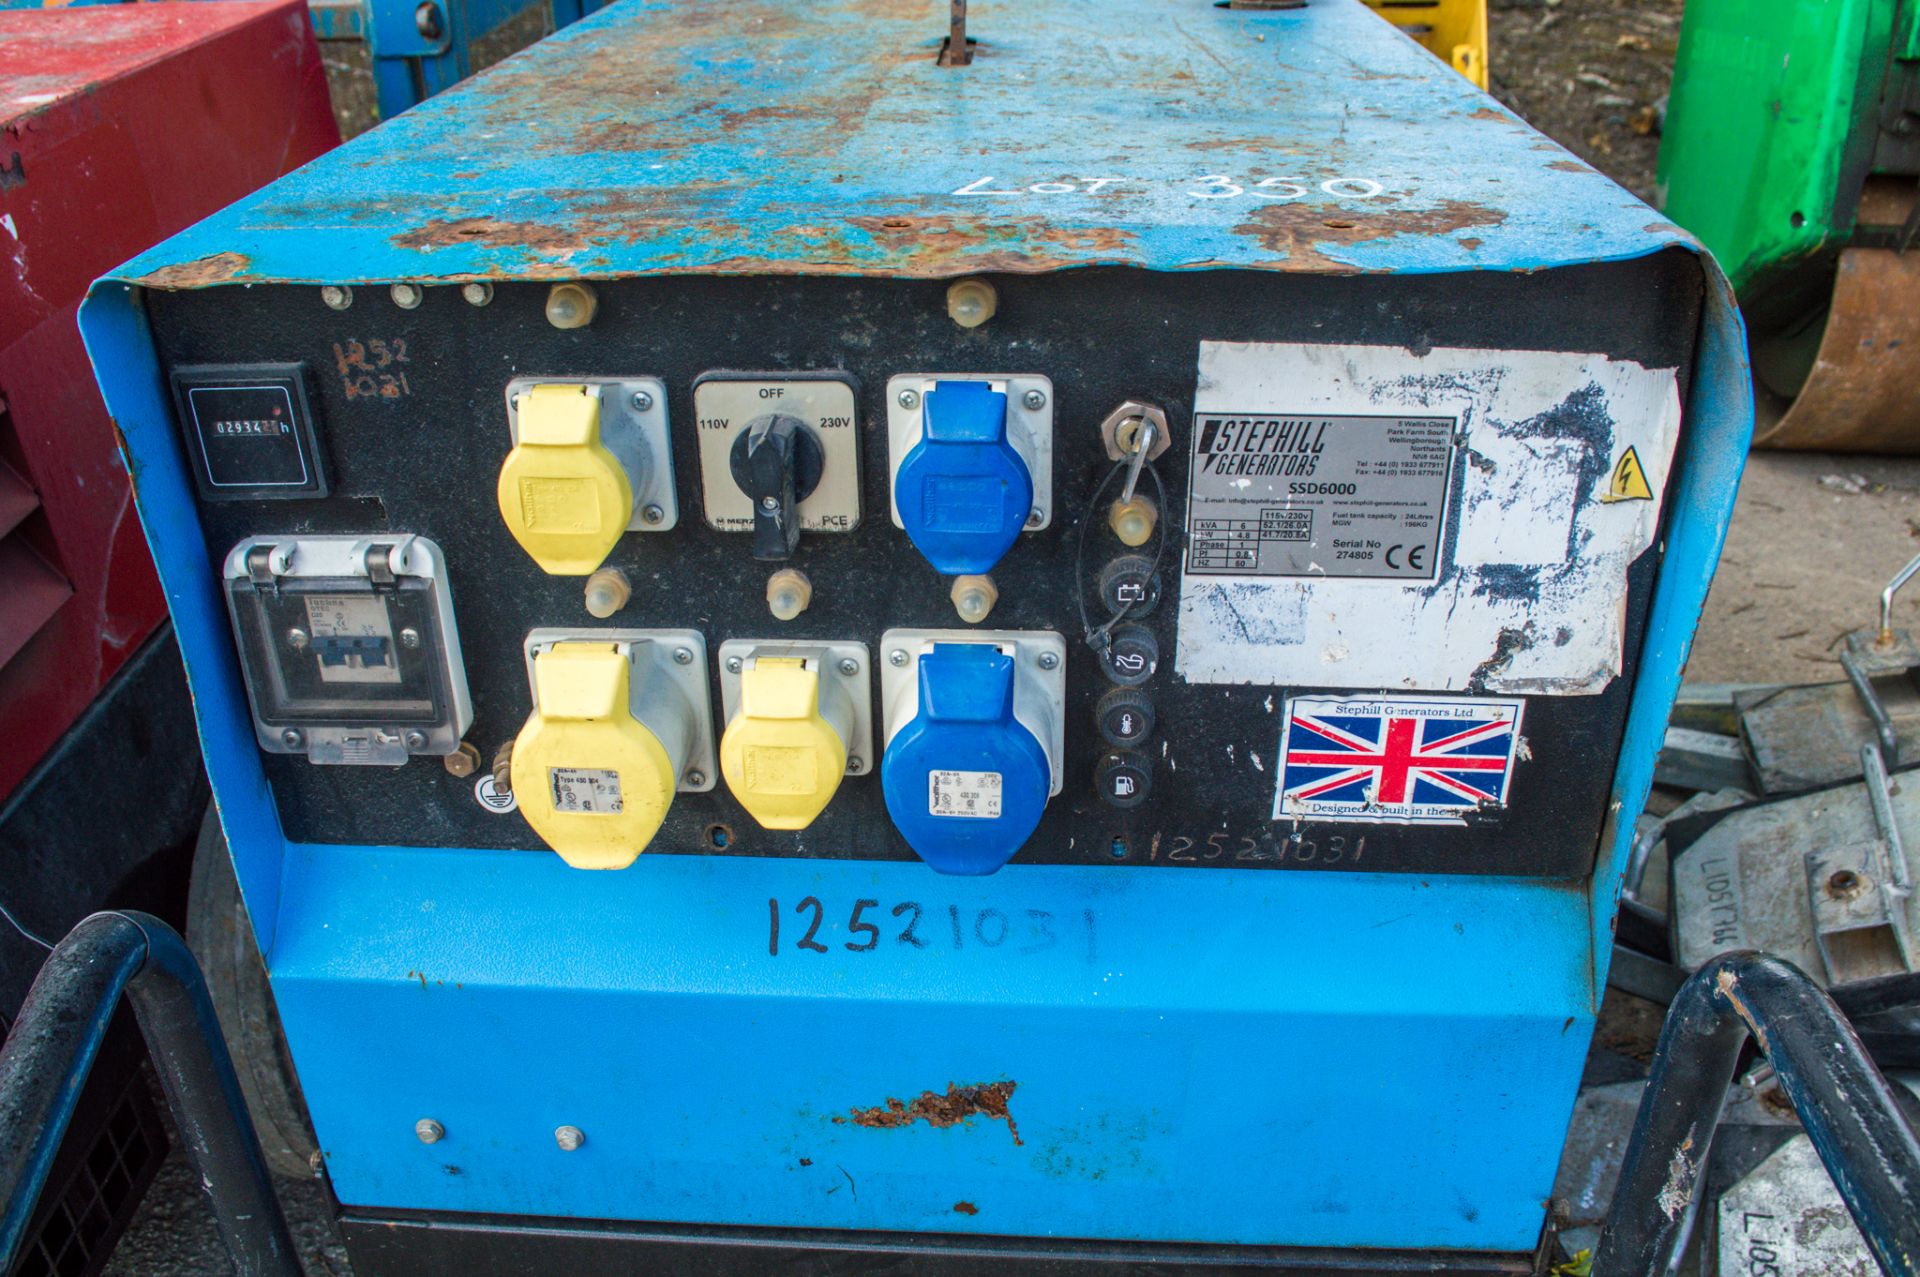 Stephill SSD6000 6 kva diesel driven generator Recorded hours: 2934 12521032 - Image 2 of 3